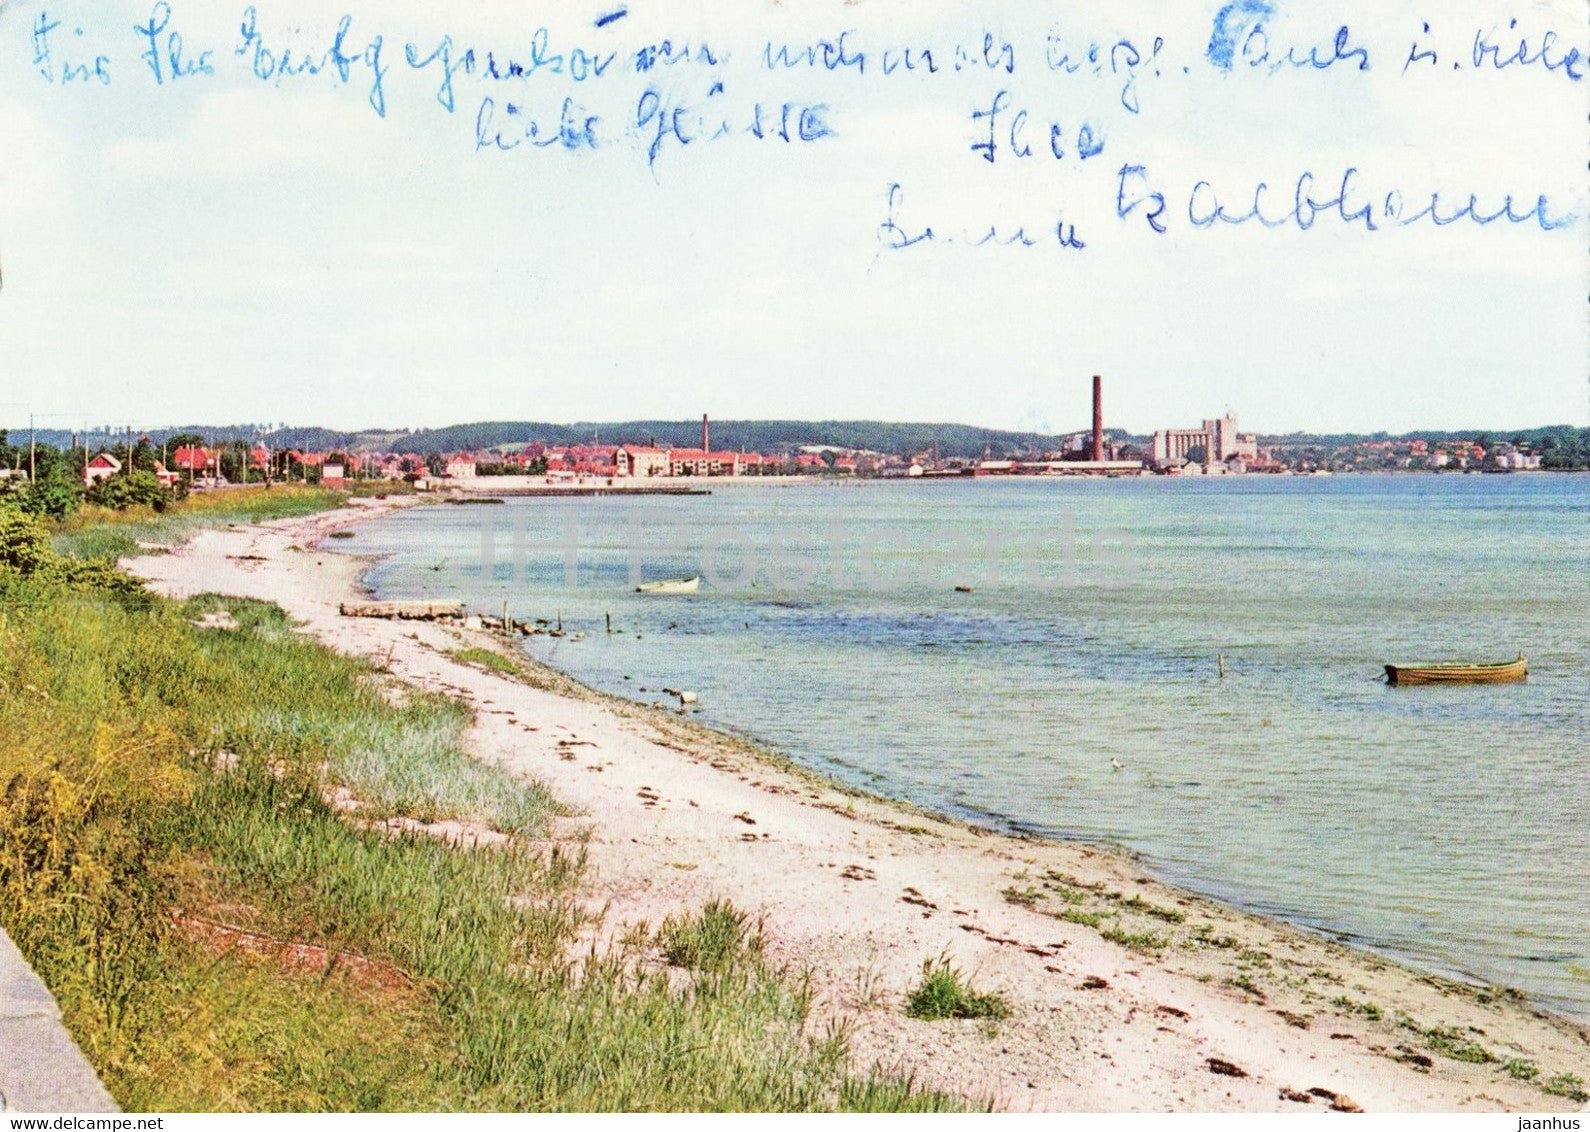 Aabenraa - View towards the town - Denmark - used - JH Postcards